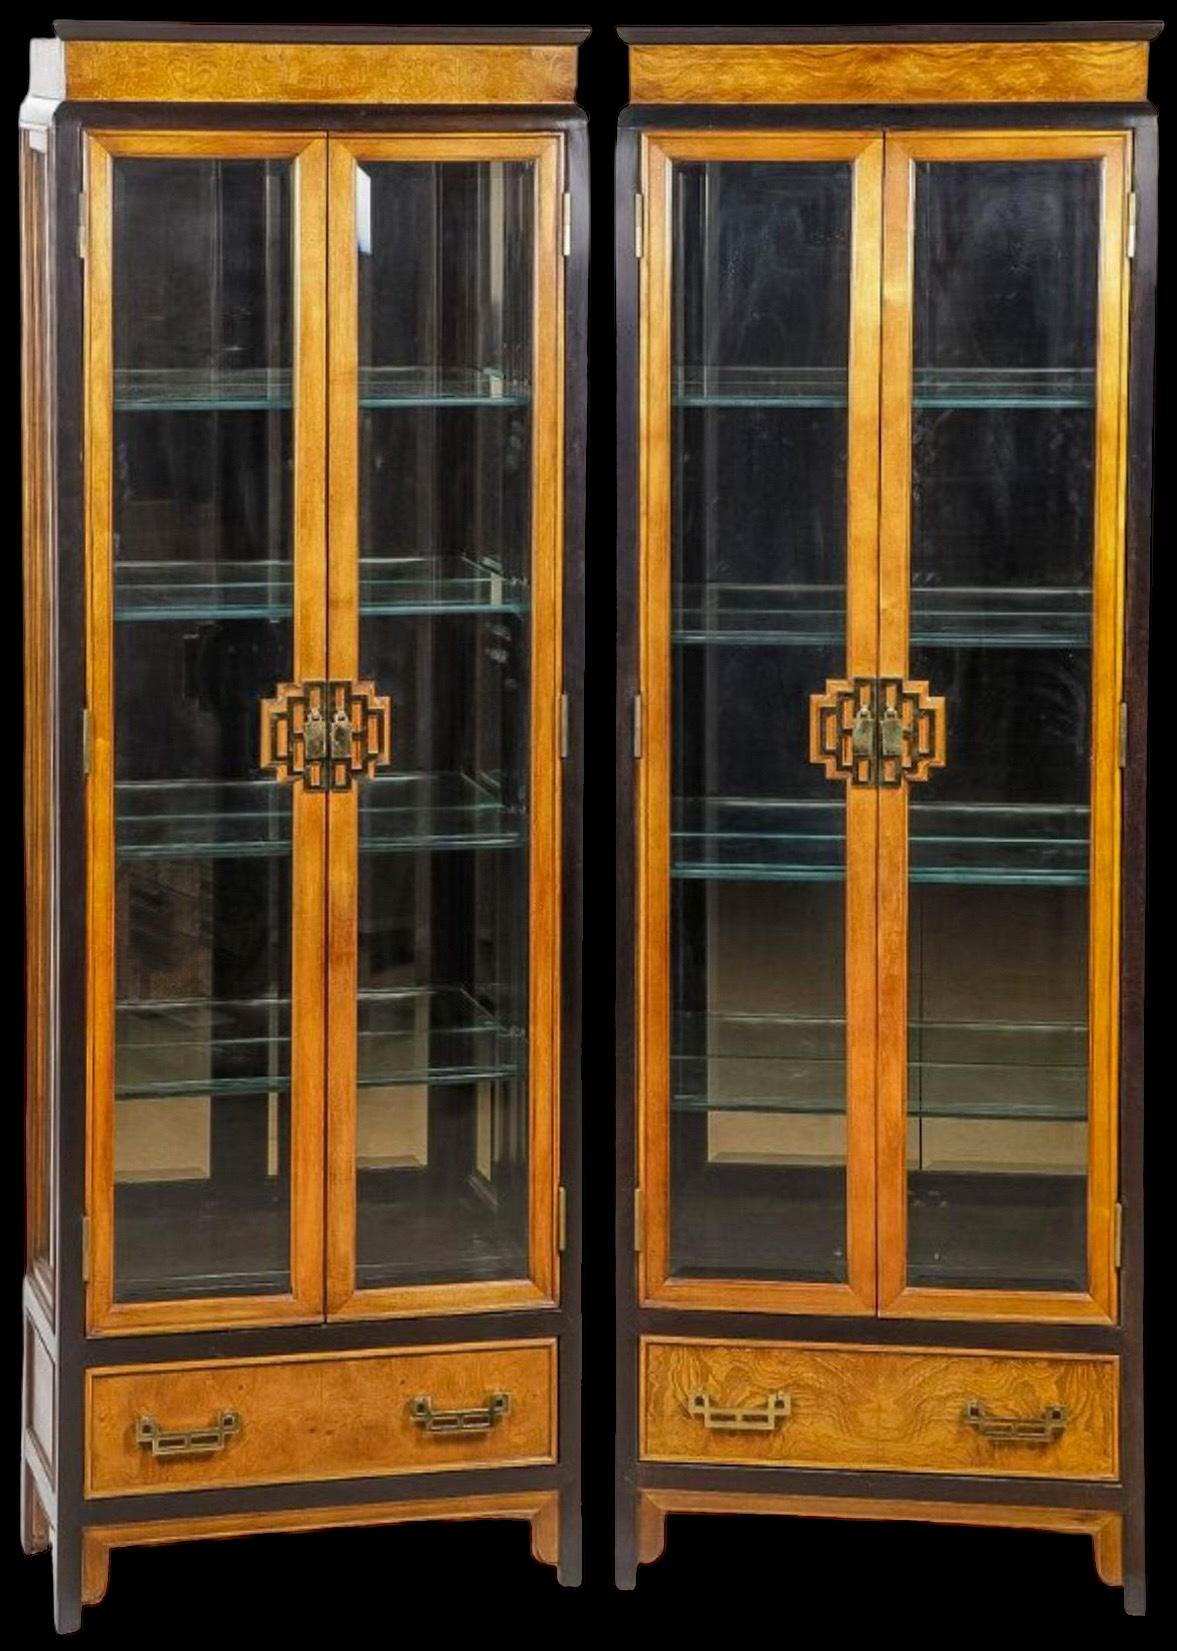 James Mont Asian Modern Style Burl & Brass Vitrines / Display Cabinets - Pair In Good Condition For Sale In Kennesaw, GA